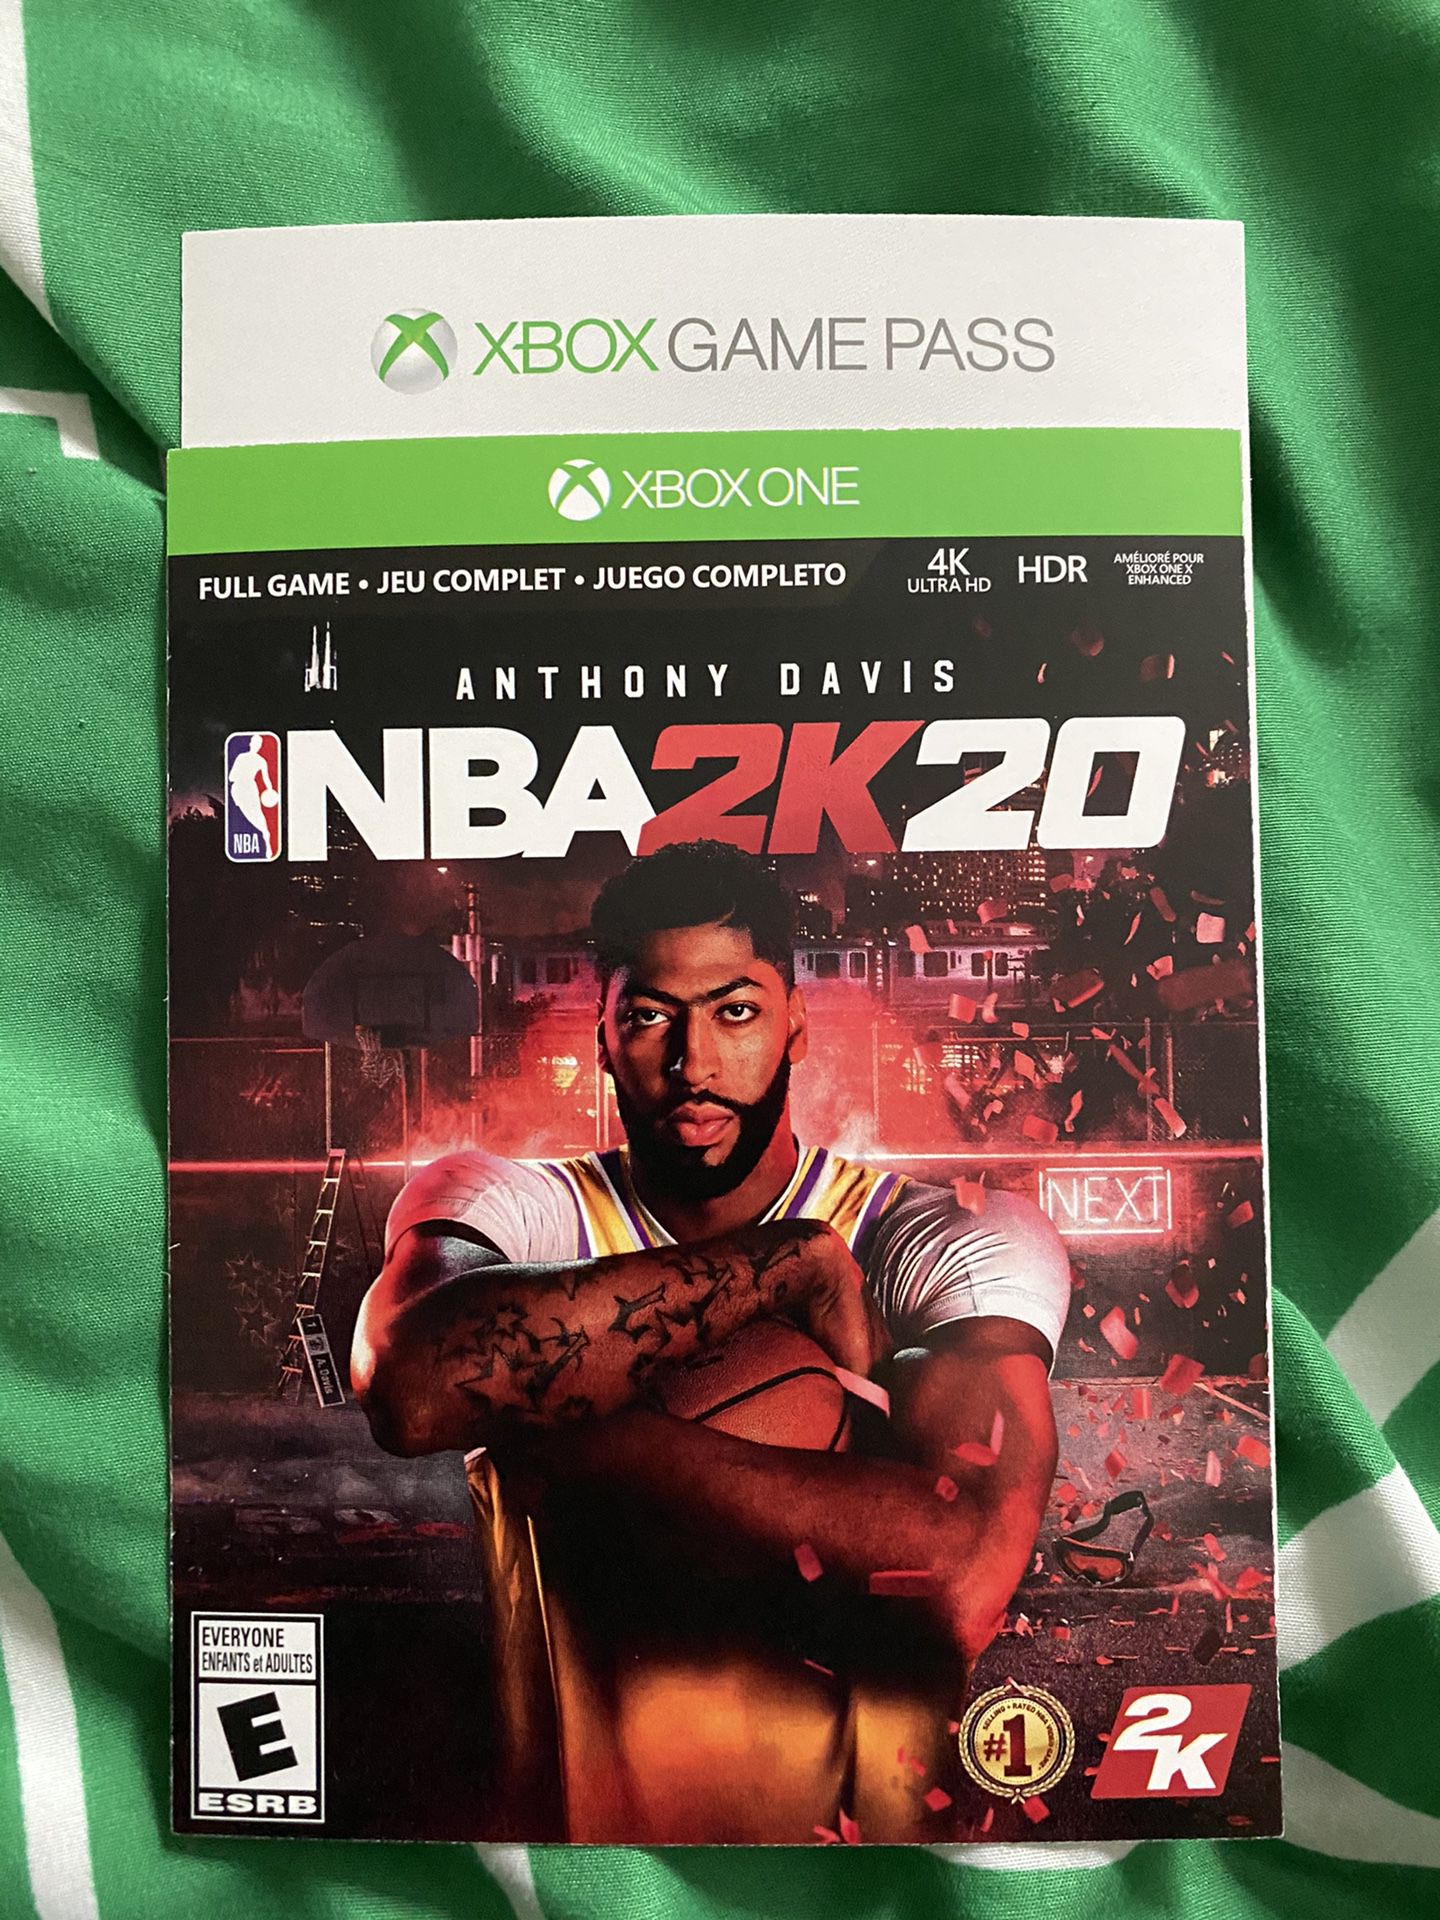 NEW NBA 2k20 comes with 1 month Xbox live & 1 mo Game pass